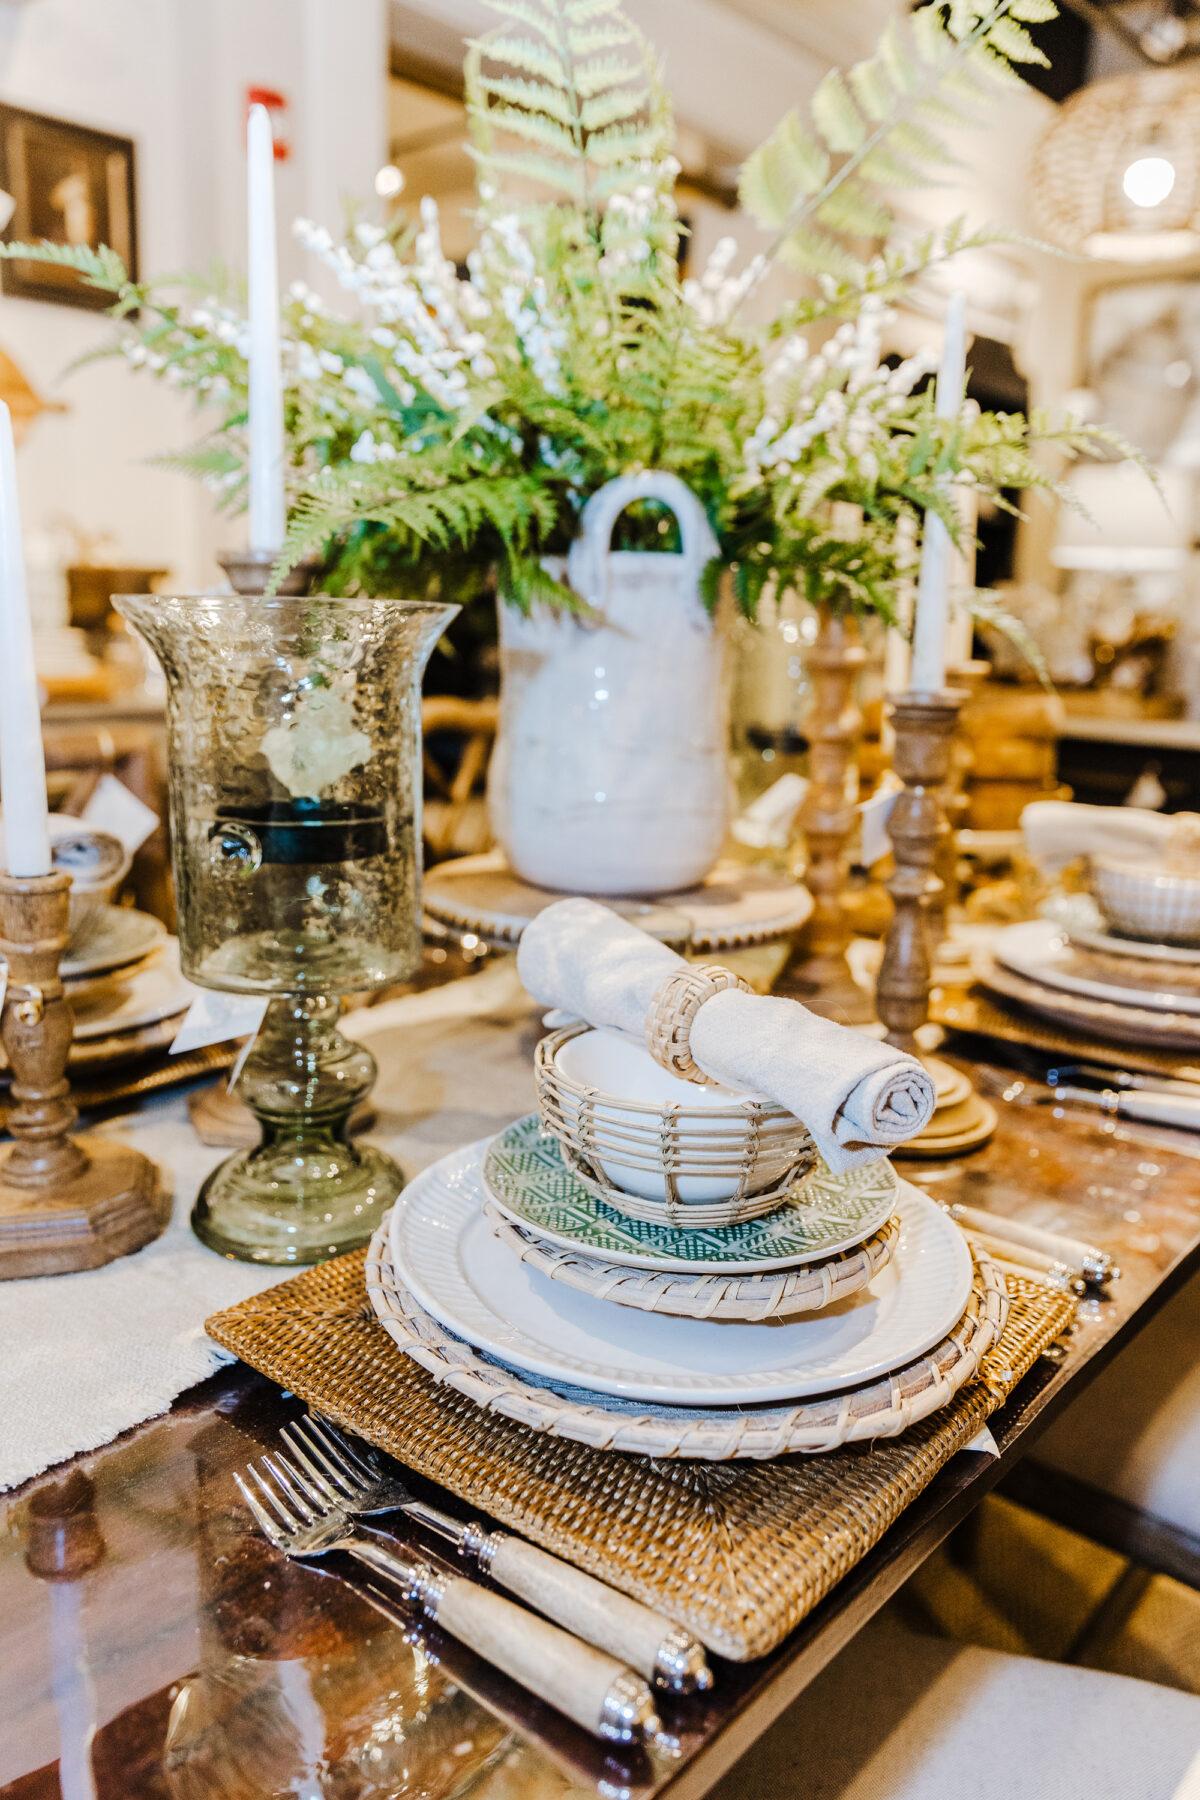 During the holiday seasons we get caught up in the glitz and glam; however, spring and summer are times when simplicity shines and textiles and texture can take centerstage. (Provided photo/TNS)